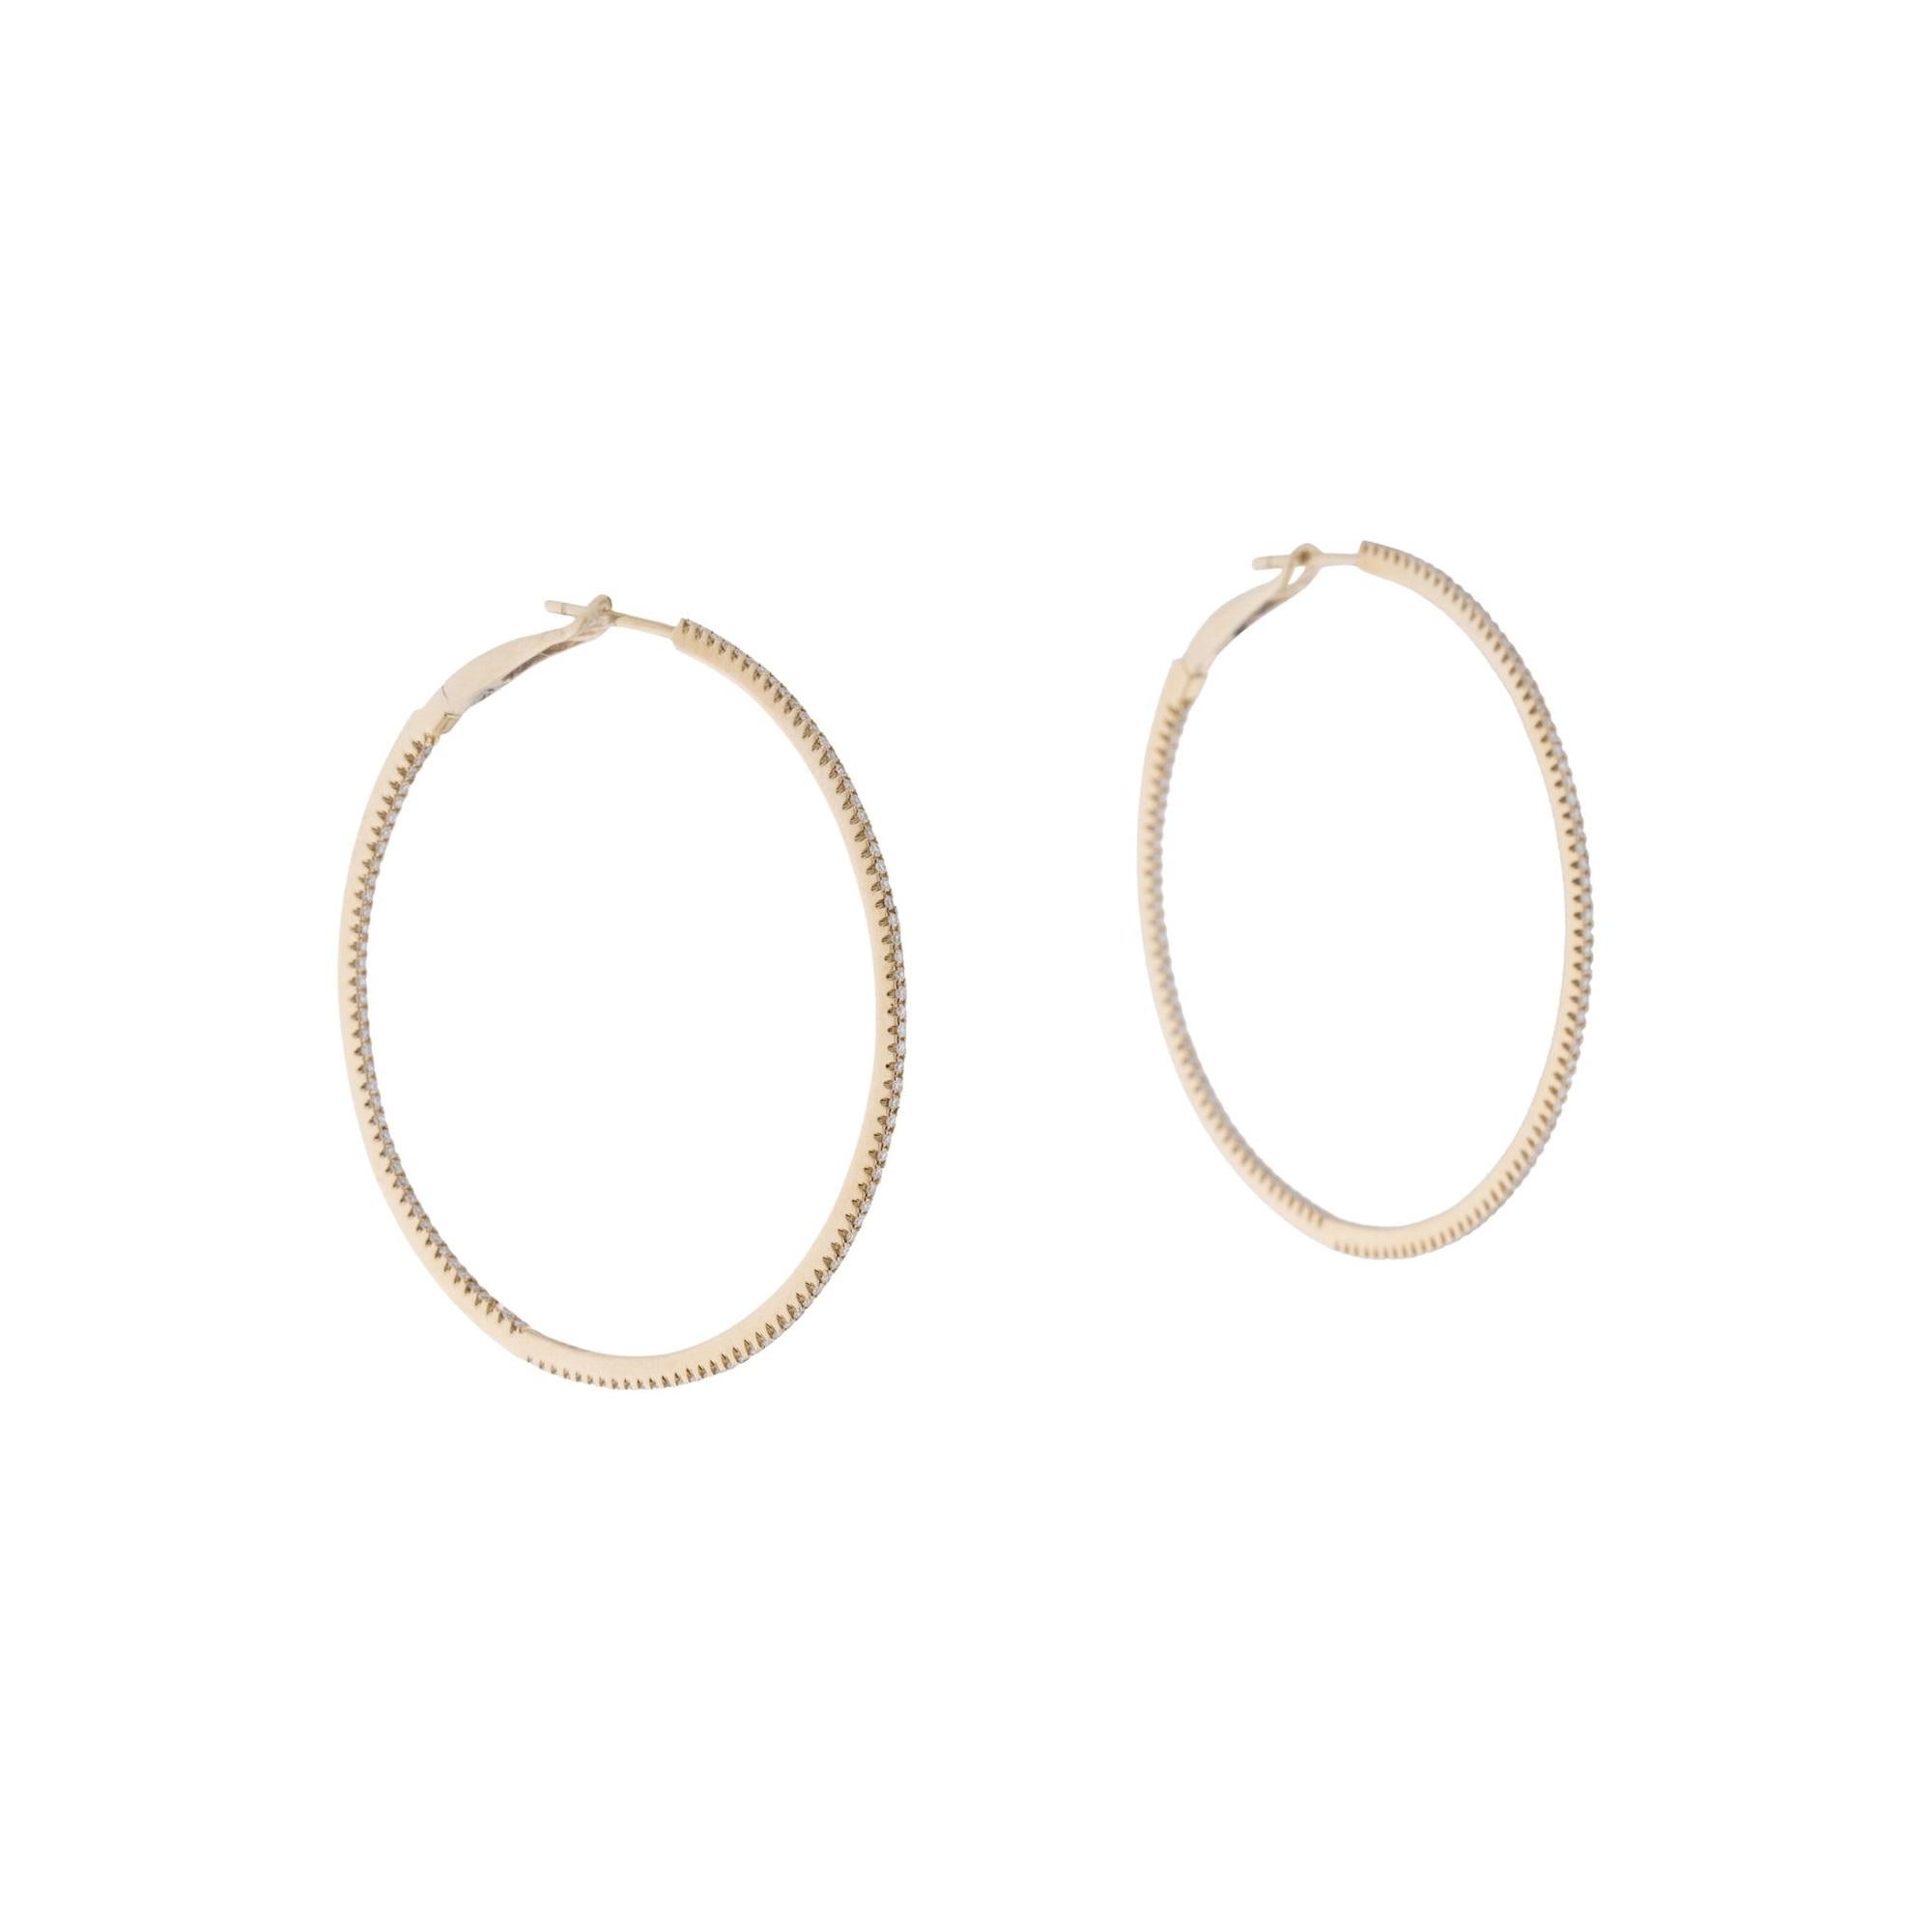 Light up your favorite looks with the brilliance of diamonds! Shimmering and bright, these gorgeous narrow round hoops glisten with approximately 0.59ct diamonds along the outer edge. Diamond color and clarity is GH SI1-SI2. Lever backs provide a